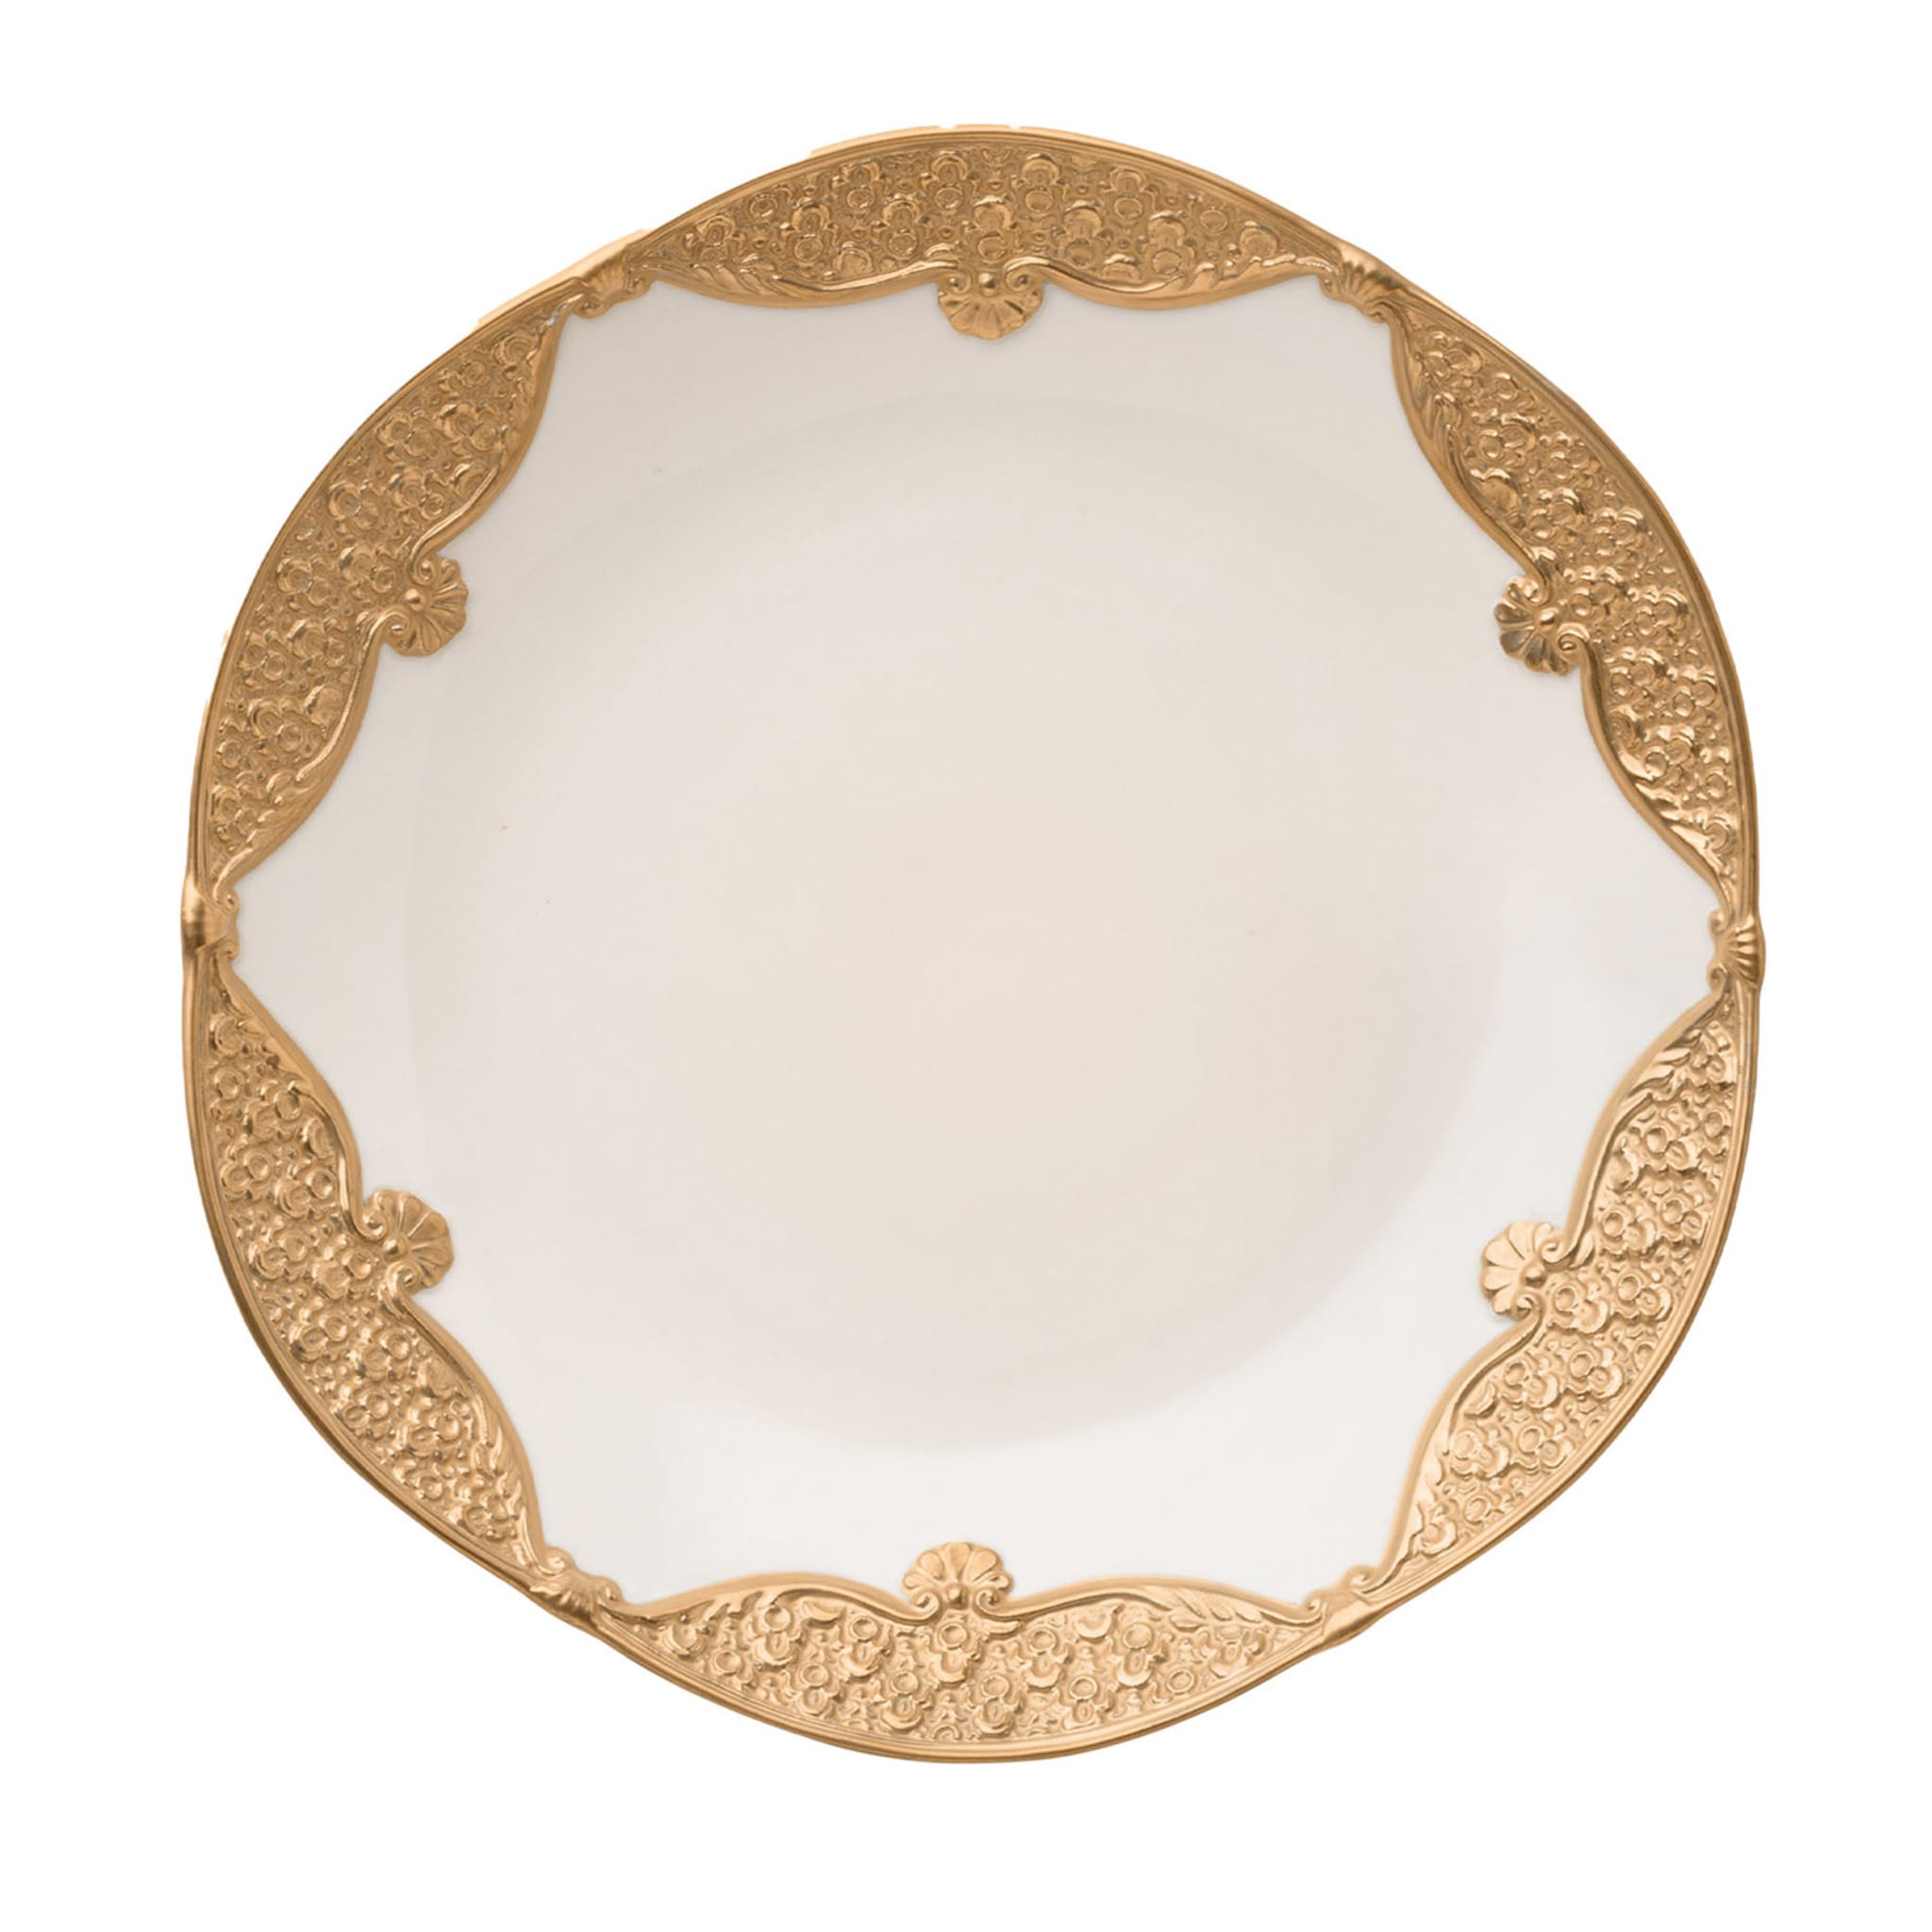 Caterina Set of 2 White & Gold Soup Plates - Main view